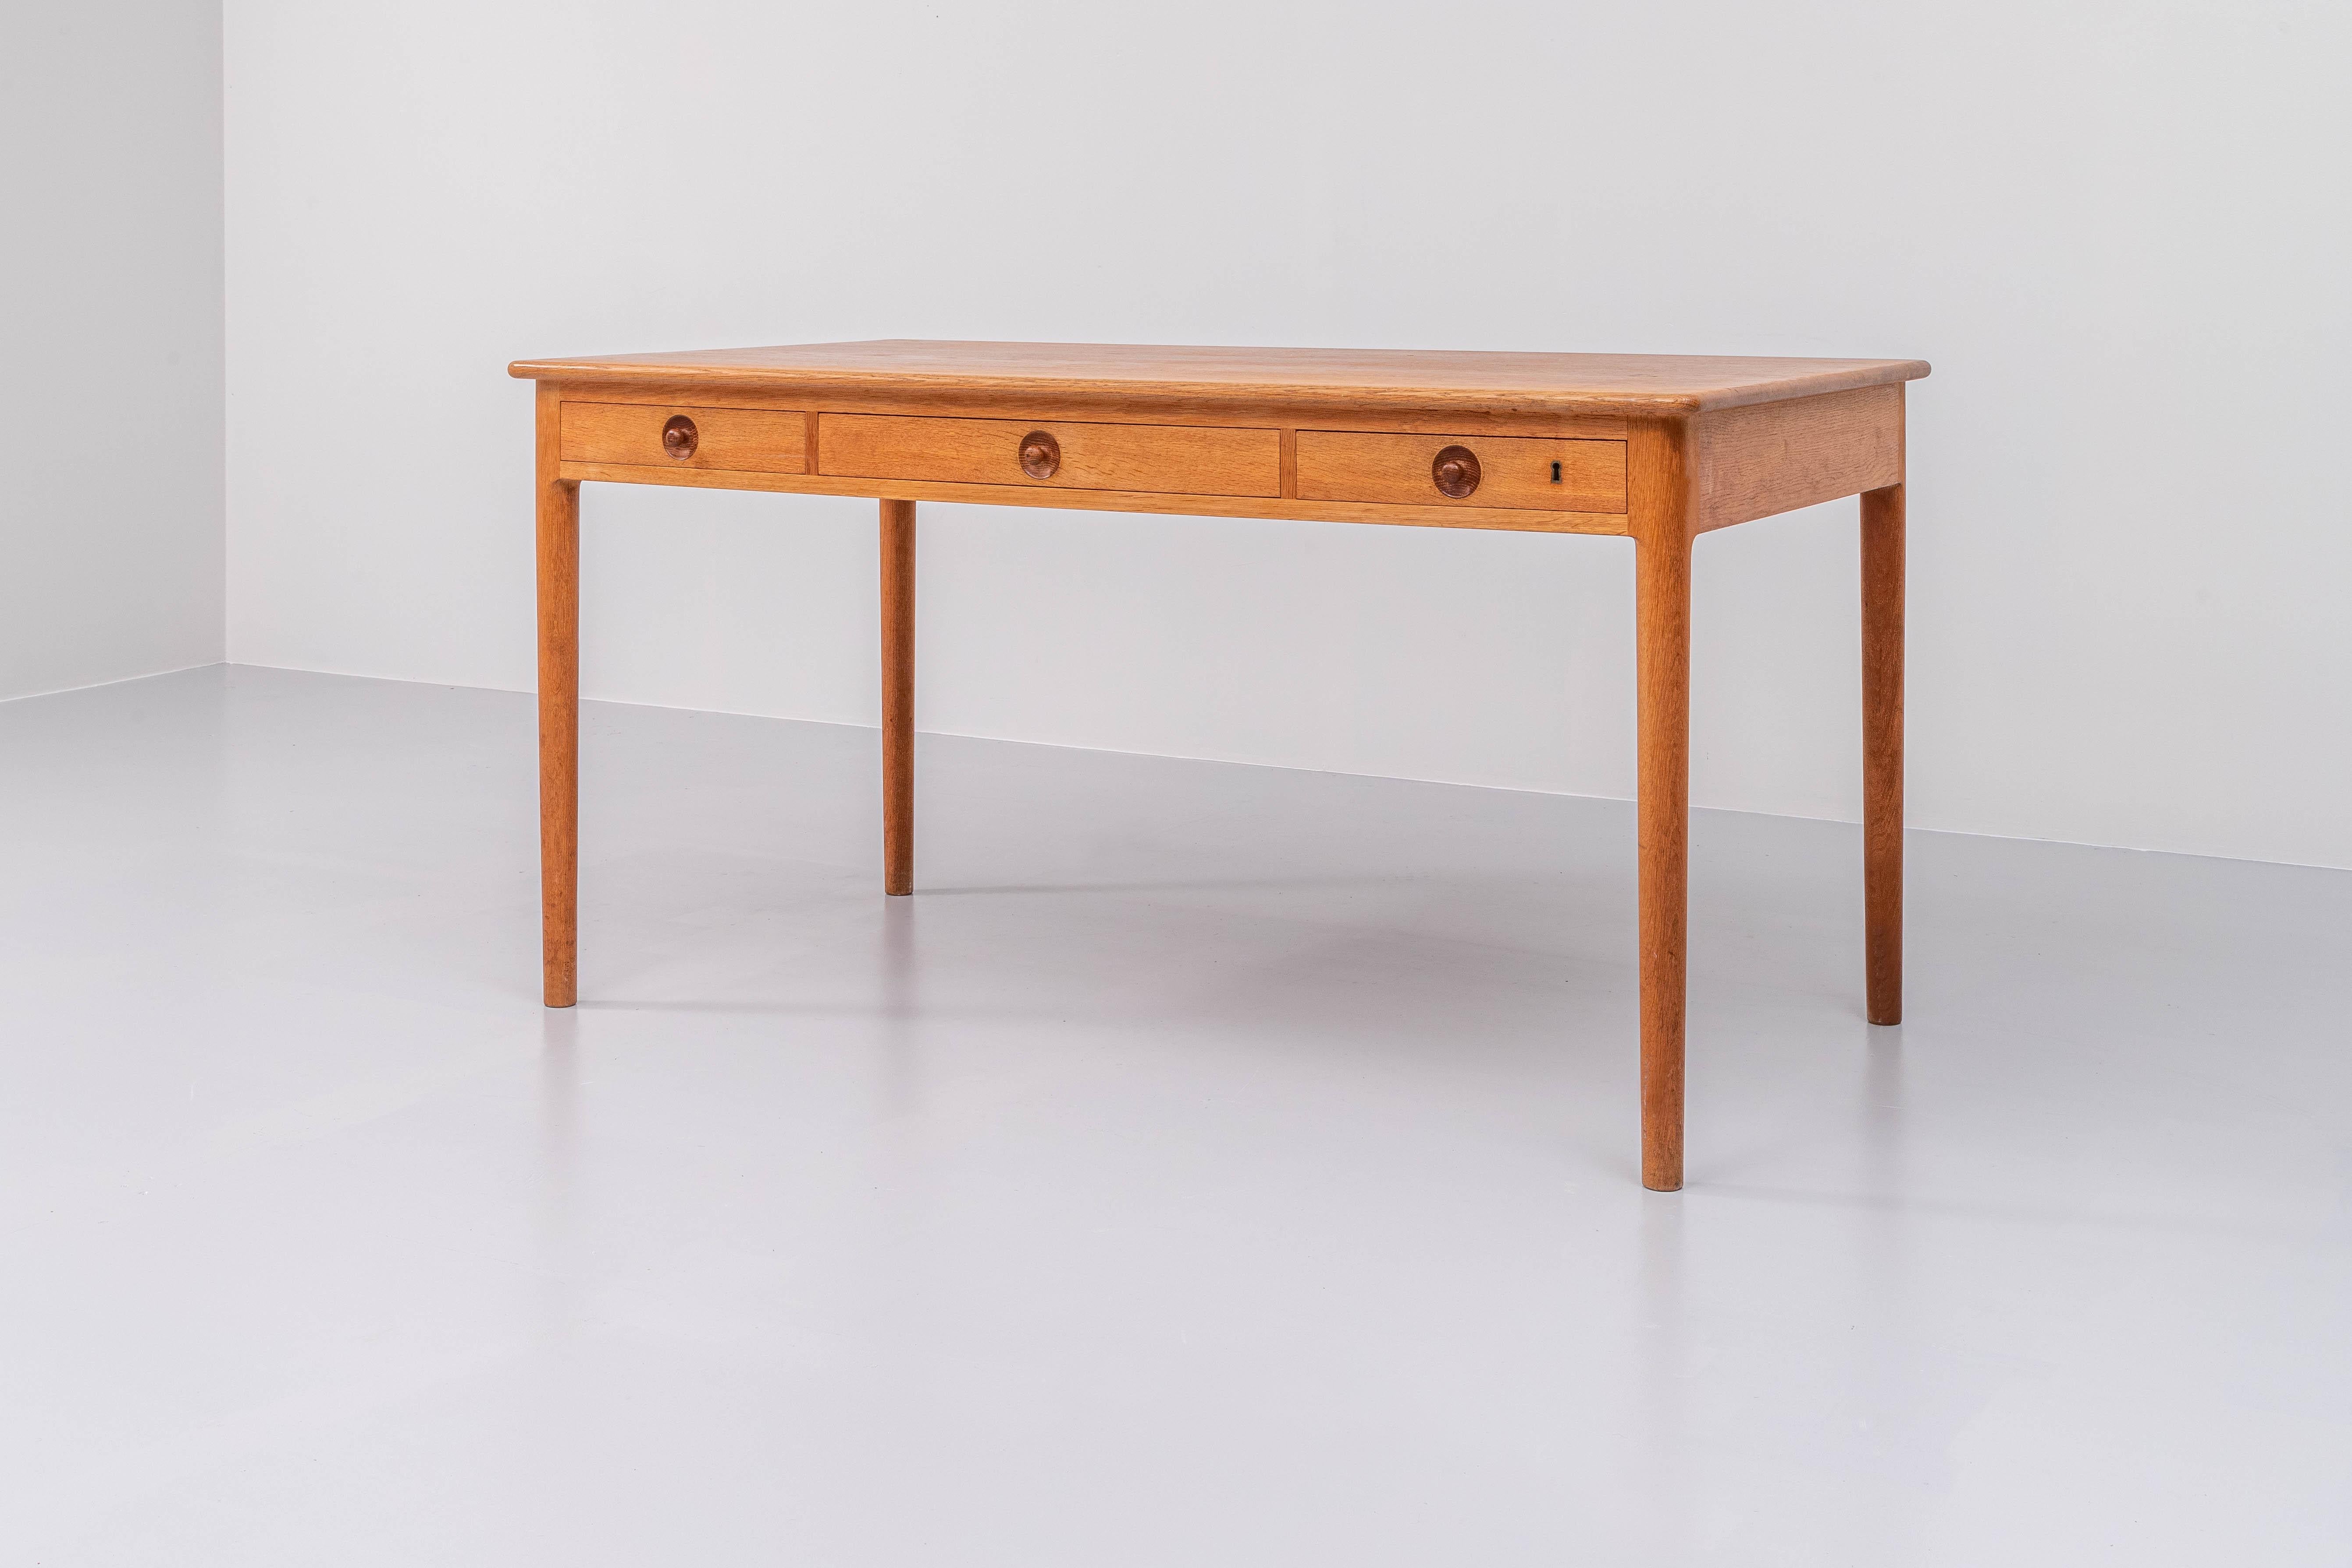 Elegant and beautifully executed sold oak ladies desk 305 by Hans Wegner for PP Møbler, Denmark, 1970’s

A somewhat smaller desk, (please note the dimensions). 

The desk is a typical example of Danish grace, elegance and functionality. Soft